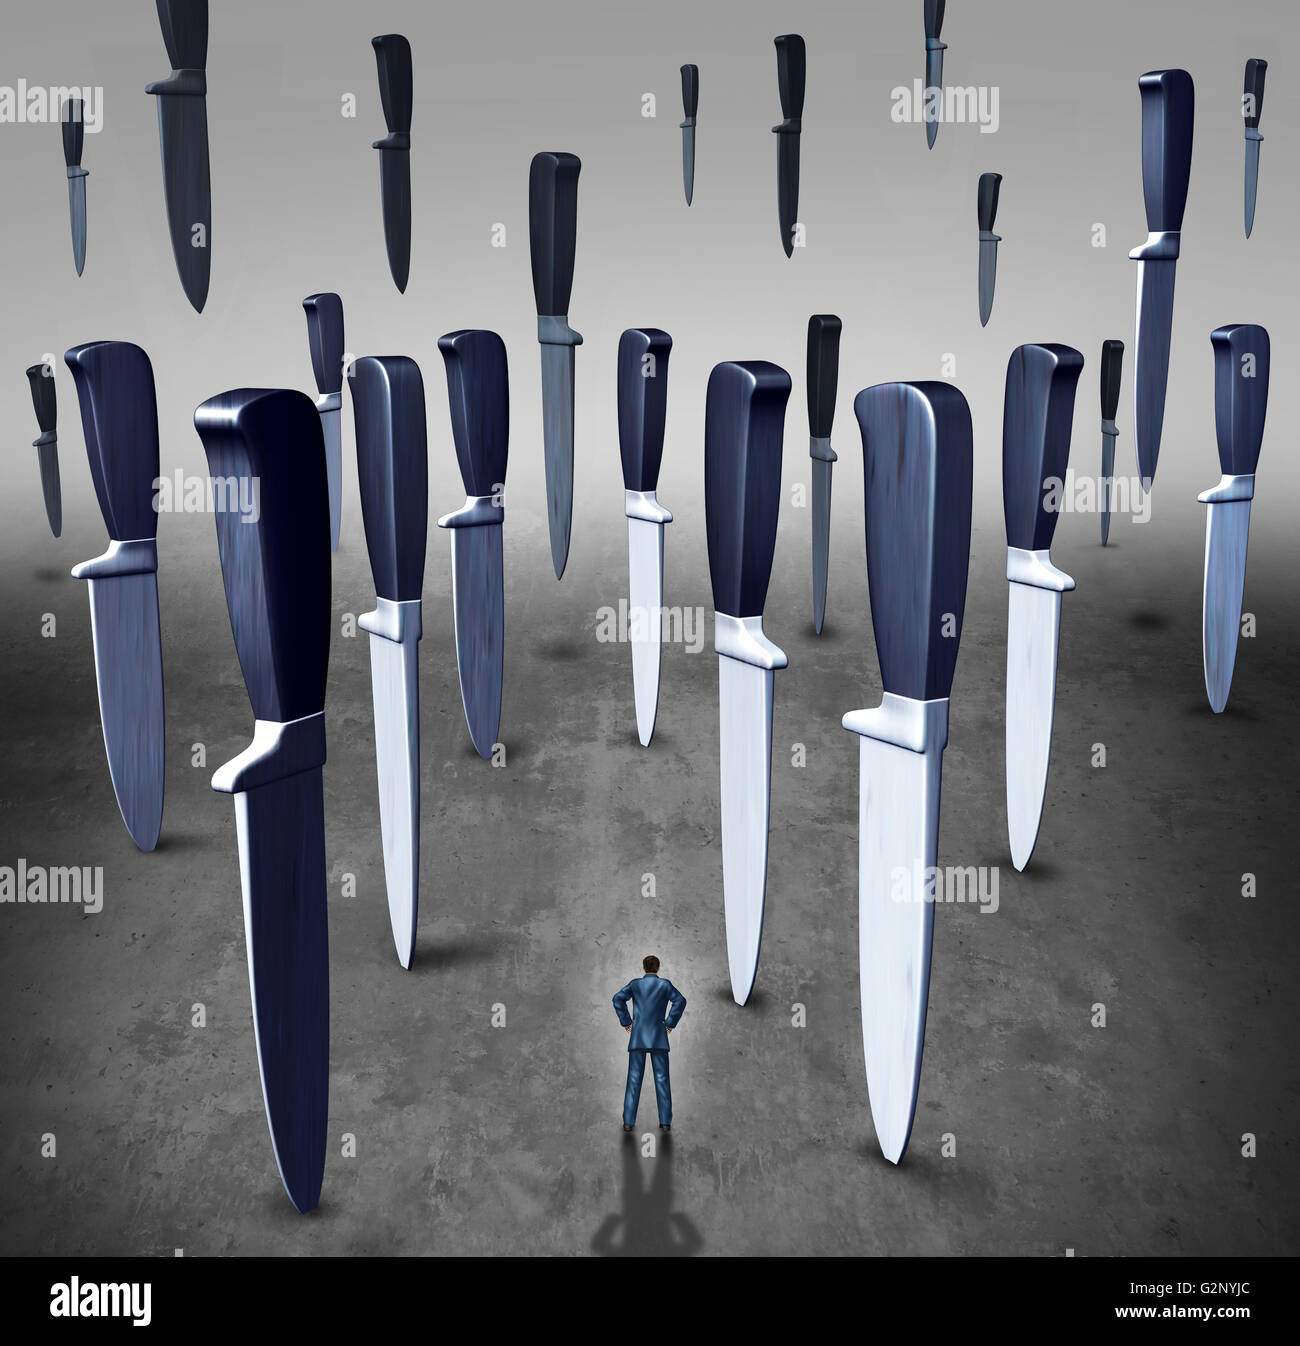 Concept of business danger or career crisis as a businessman in a path of falling knives and knife blades as a metaphor for corporate risk with 3D illustration elements. Stock Photo